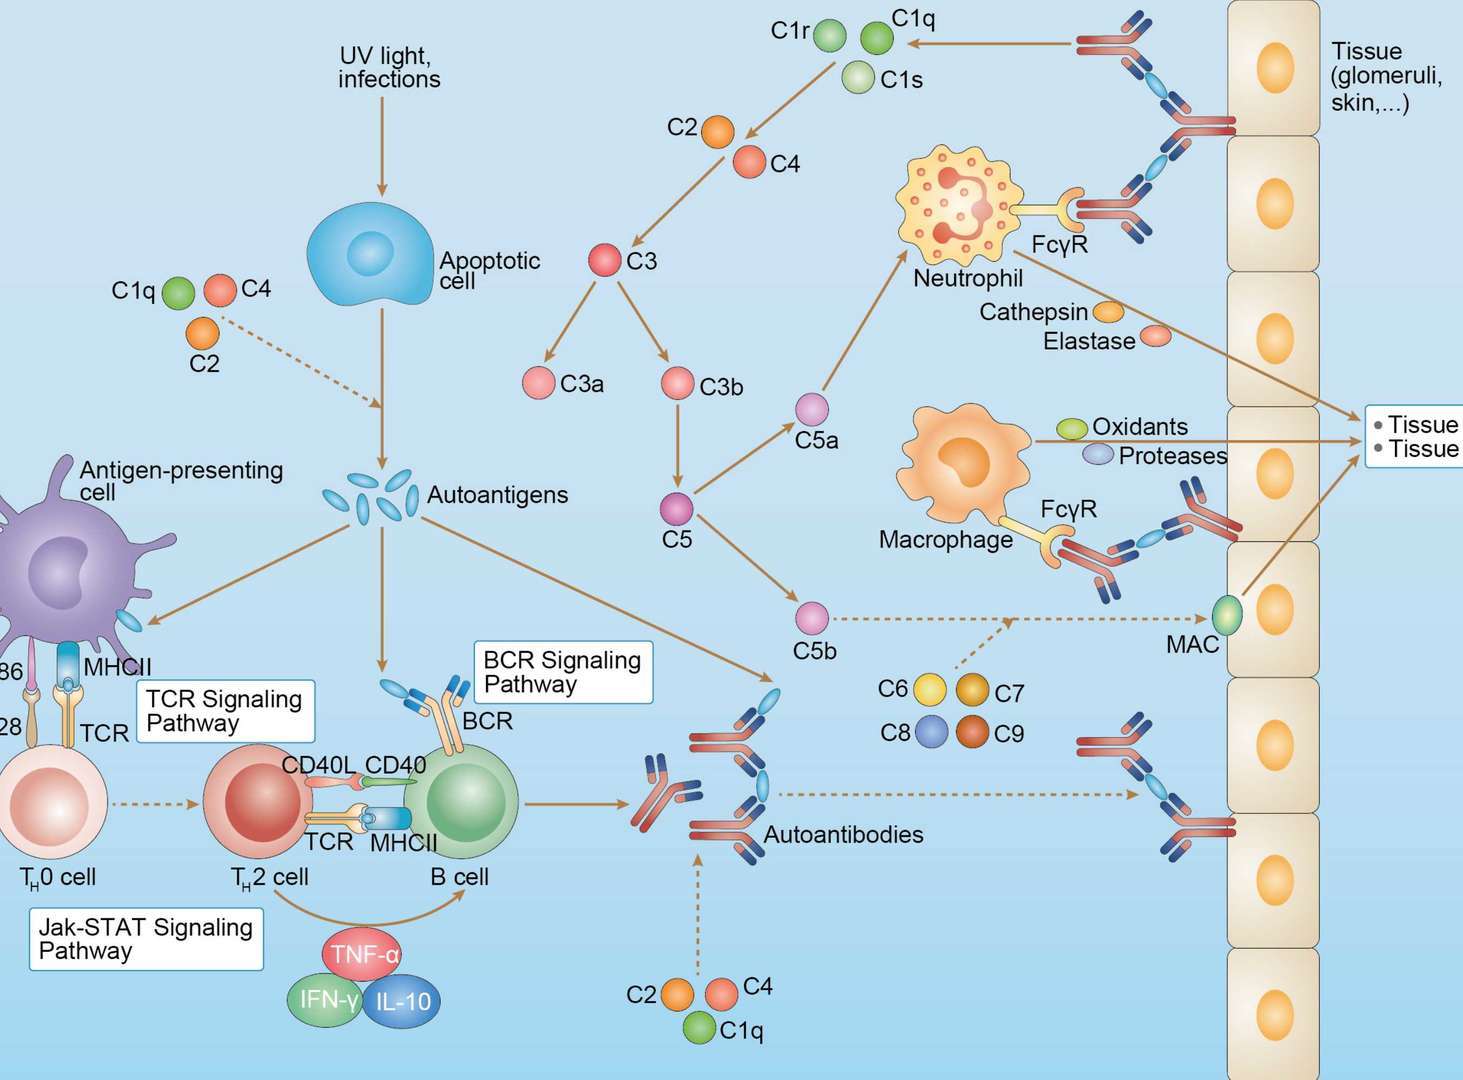 Systemic Lupus Erythematosus Overview - Pathways, Diagnosis, Targeted Therapies